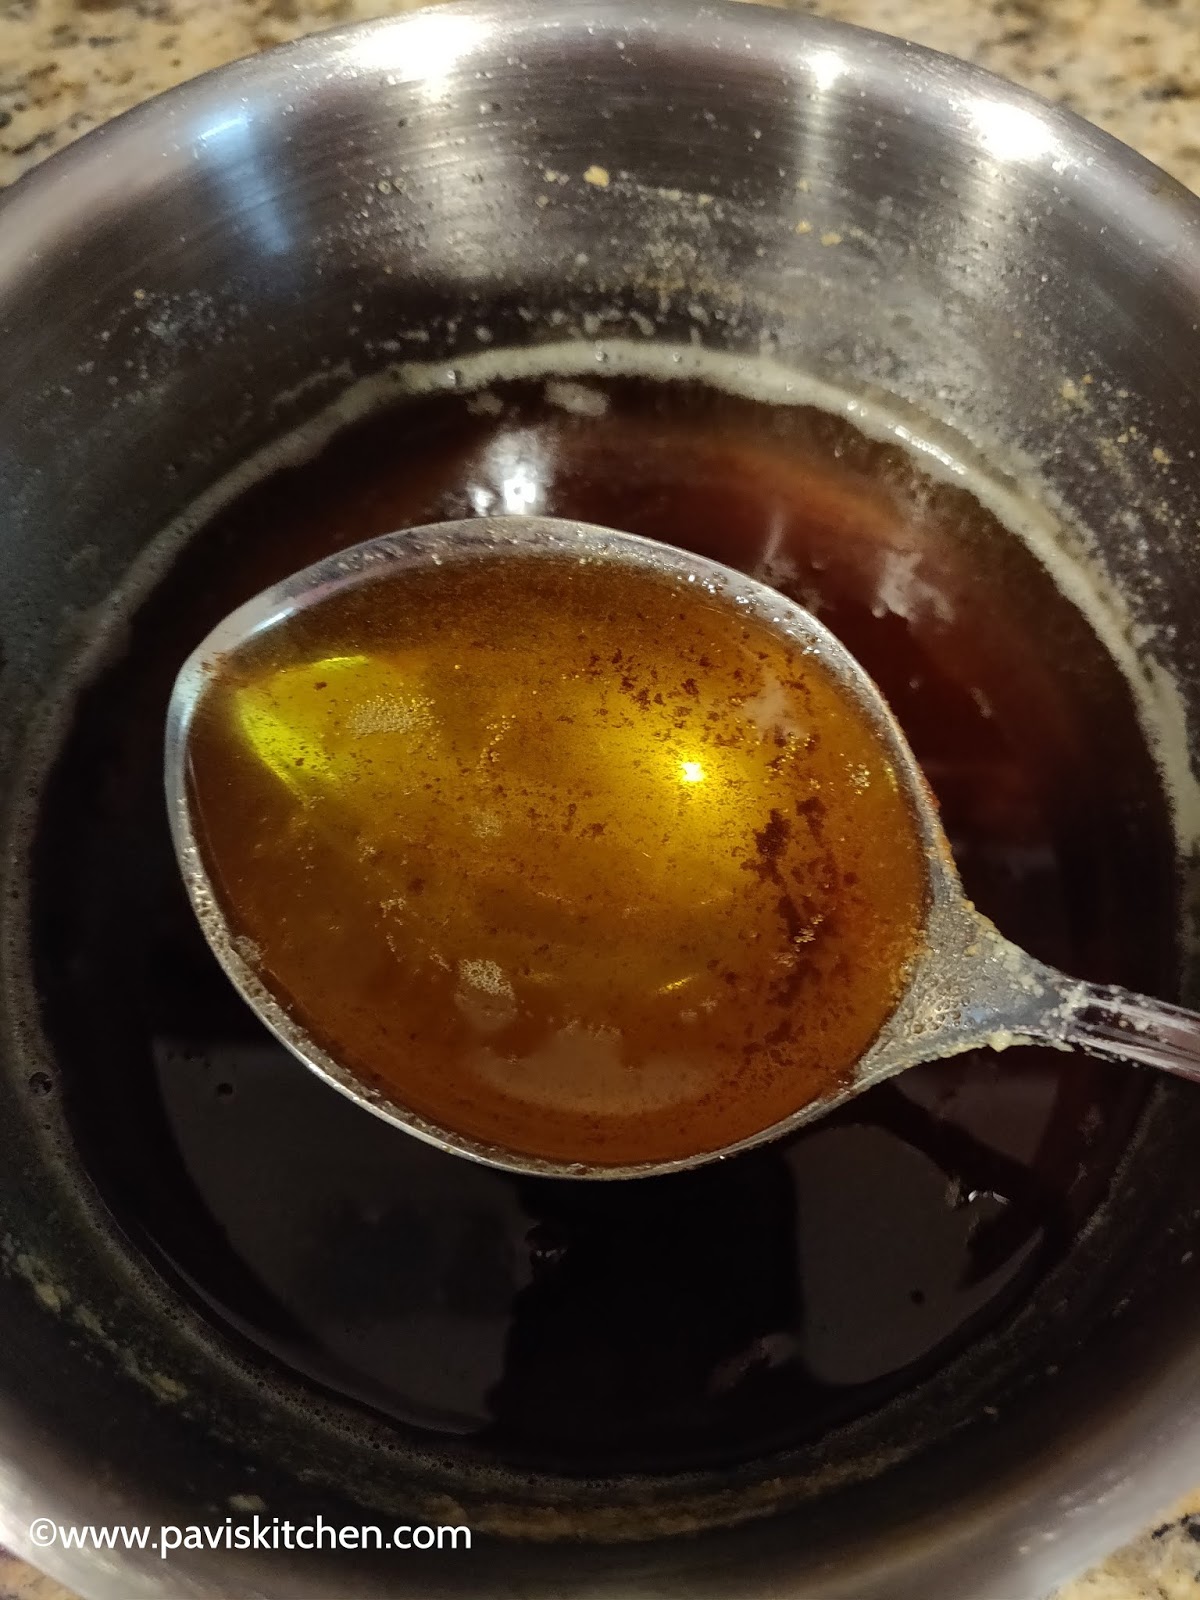 How To Make Ghee At Home | Clarified Butter Recipe